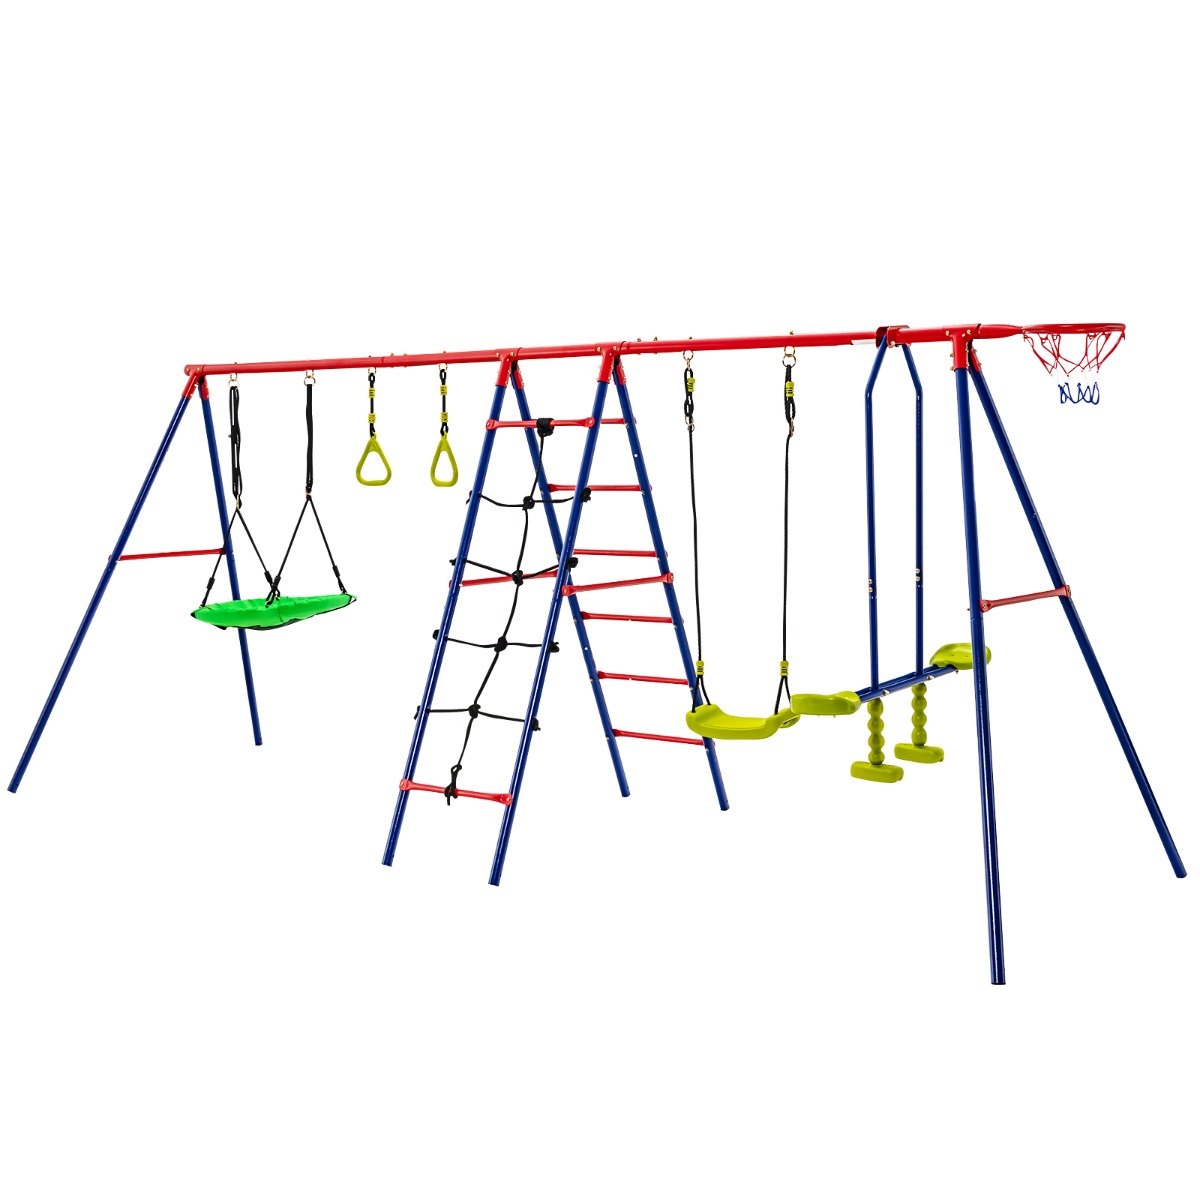 Kids Outdoor Swing Set with Climbing Ladder: Active Playtime Adventure